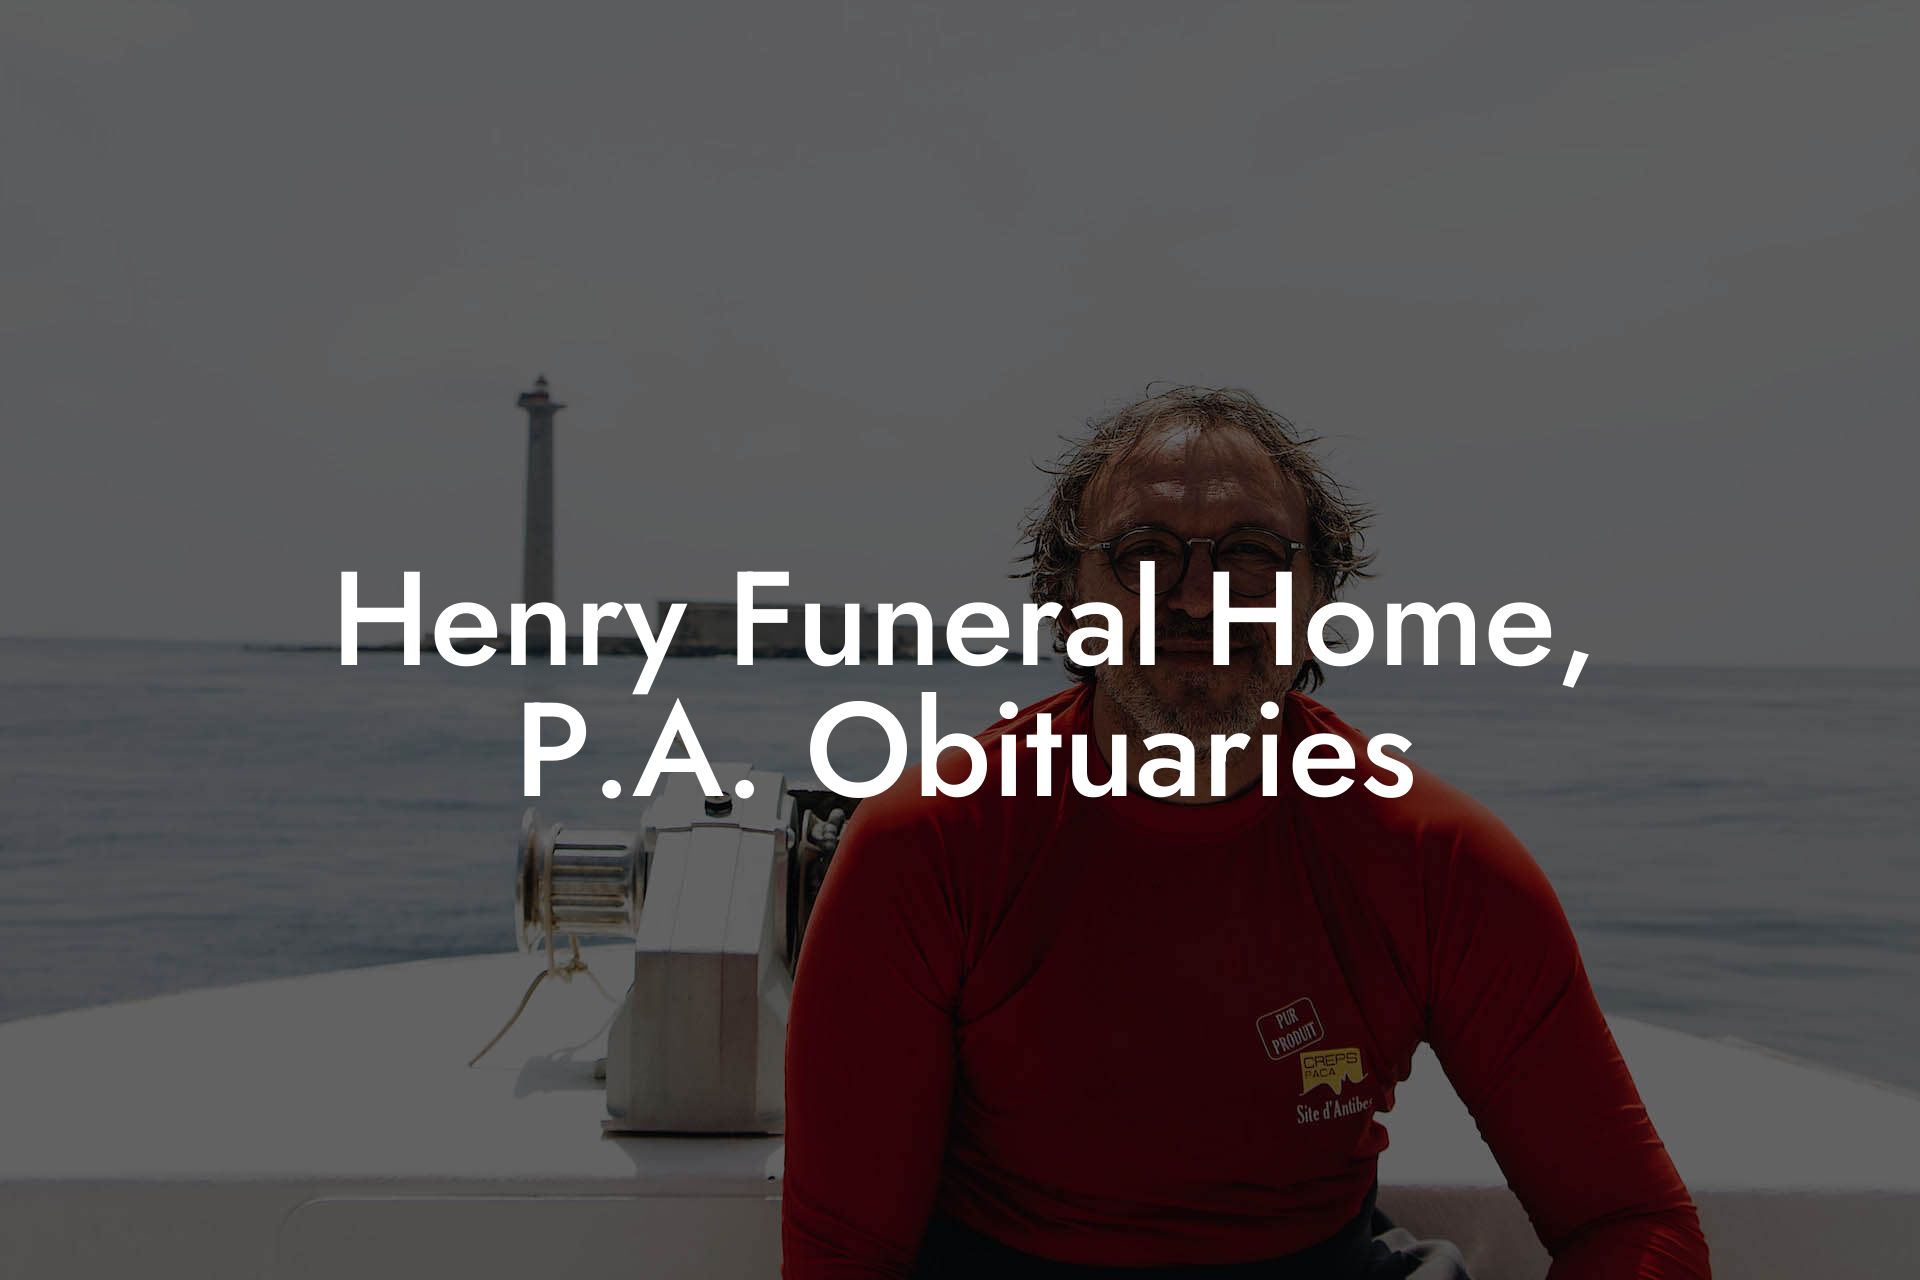 Henry Funeral Home, P.A. Obituaries